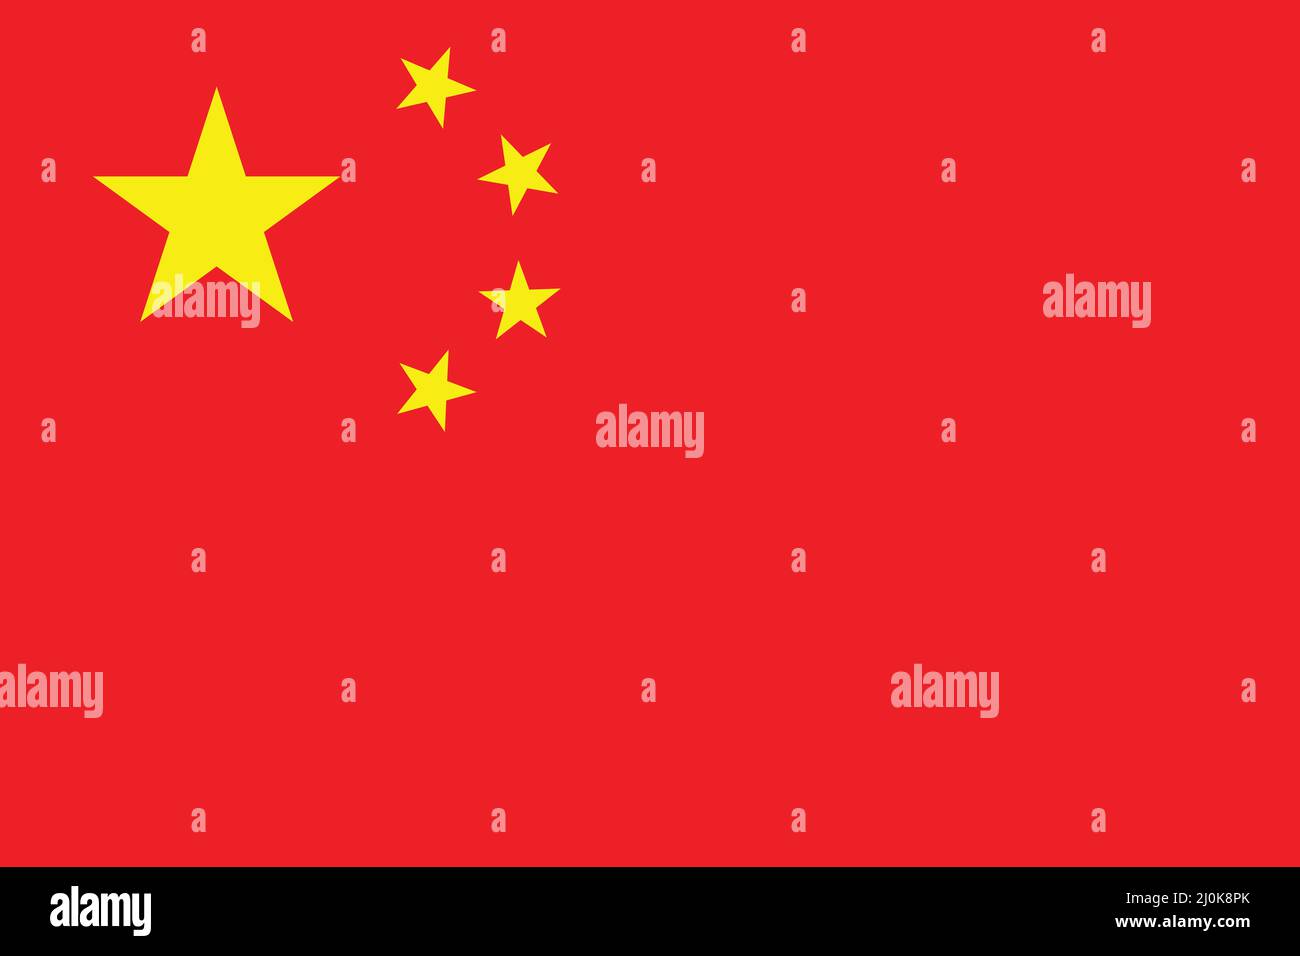 The flag of China, officially the National Flag of the People's Republic of China and also often known as the Five-starred Red Flag. This is the offic Stock Vector